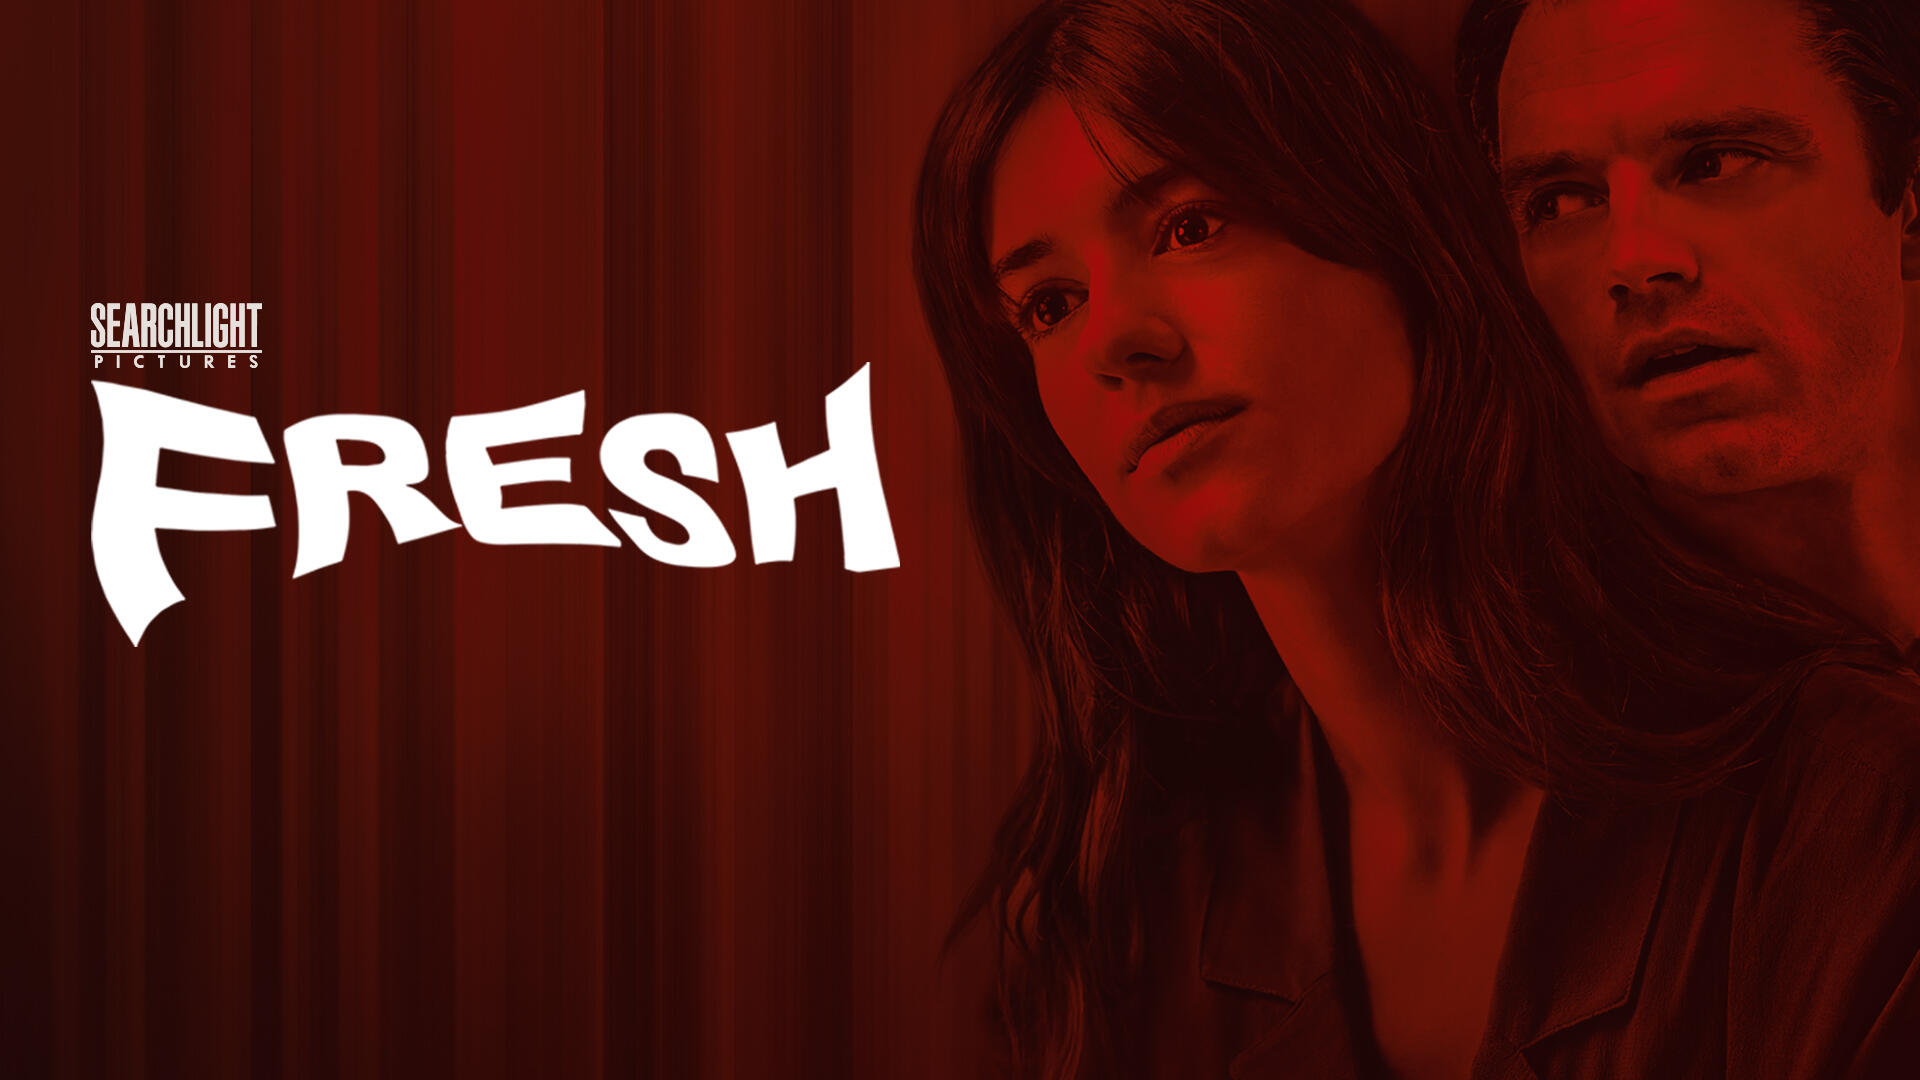 Fresh -- “FRESH” follows Noa (Daisy Edgar-Jones), who meets the alluring Steve (Sebastian Stan) at a grocery store and – given her frustration with dating apps – takes a chance and gives him her number. After their first date, Noa is smitten and accepts Steve’s invitation to a romantic weekend getaway. Only to find that her new paramour has been hiding some unusual appetites. Noa (Daisy Edgar-Jones) and Steve (Sebastian Stan), shown. (Courtesy of Searchlight Pictures)